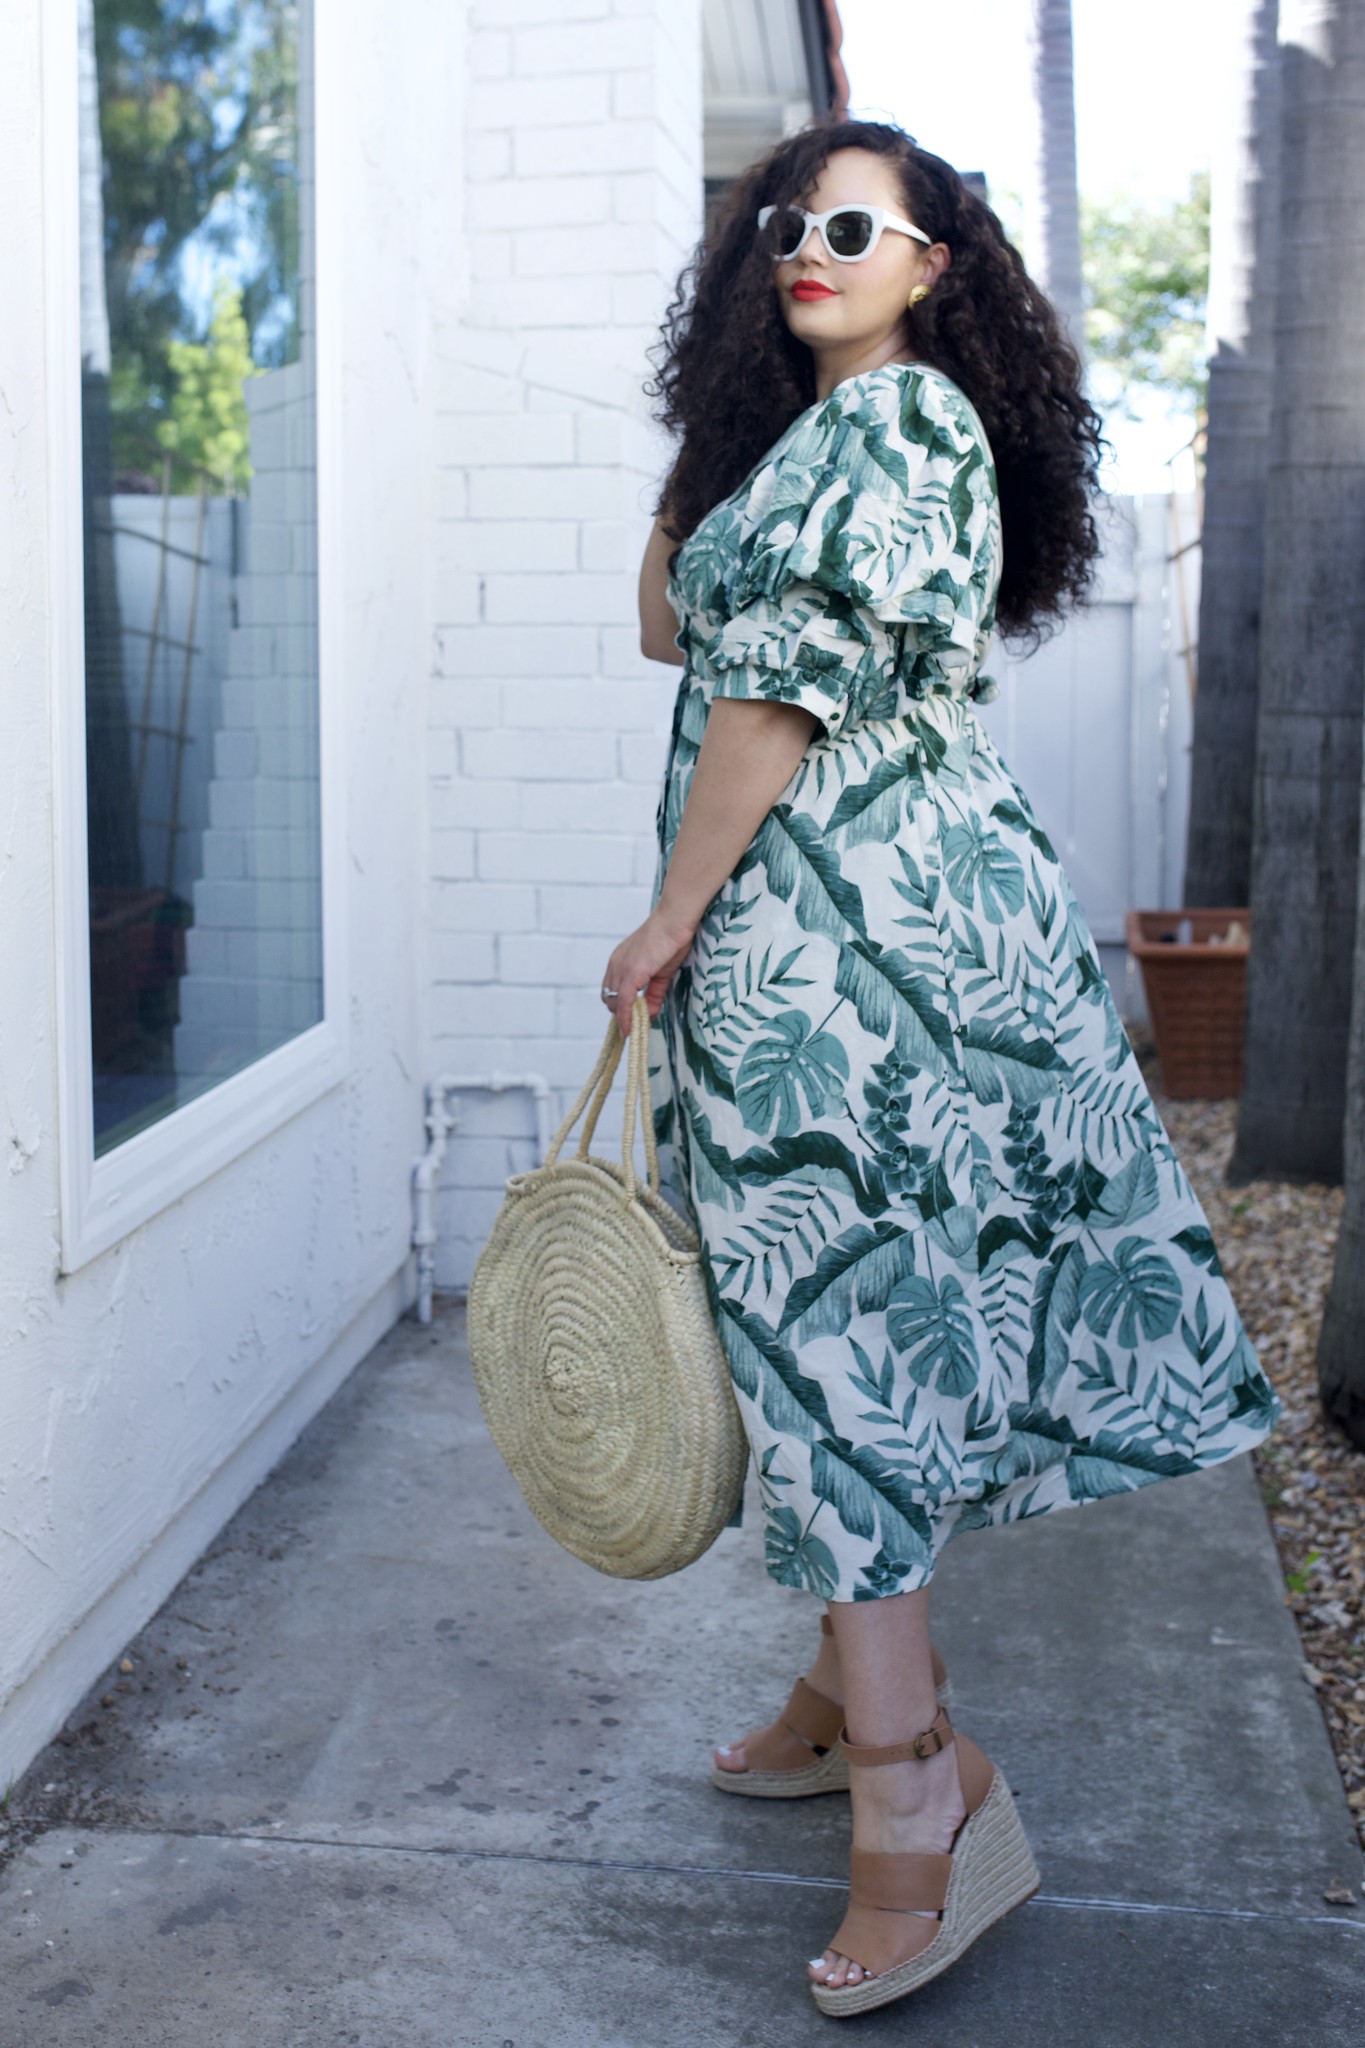 Bored of Florals? Try Leaf Prints Instead | Girl With Curves